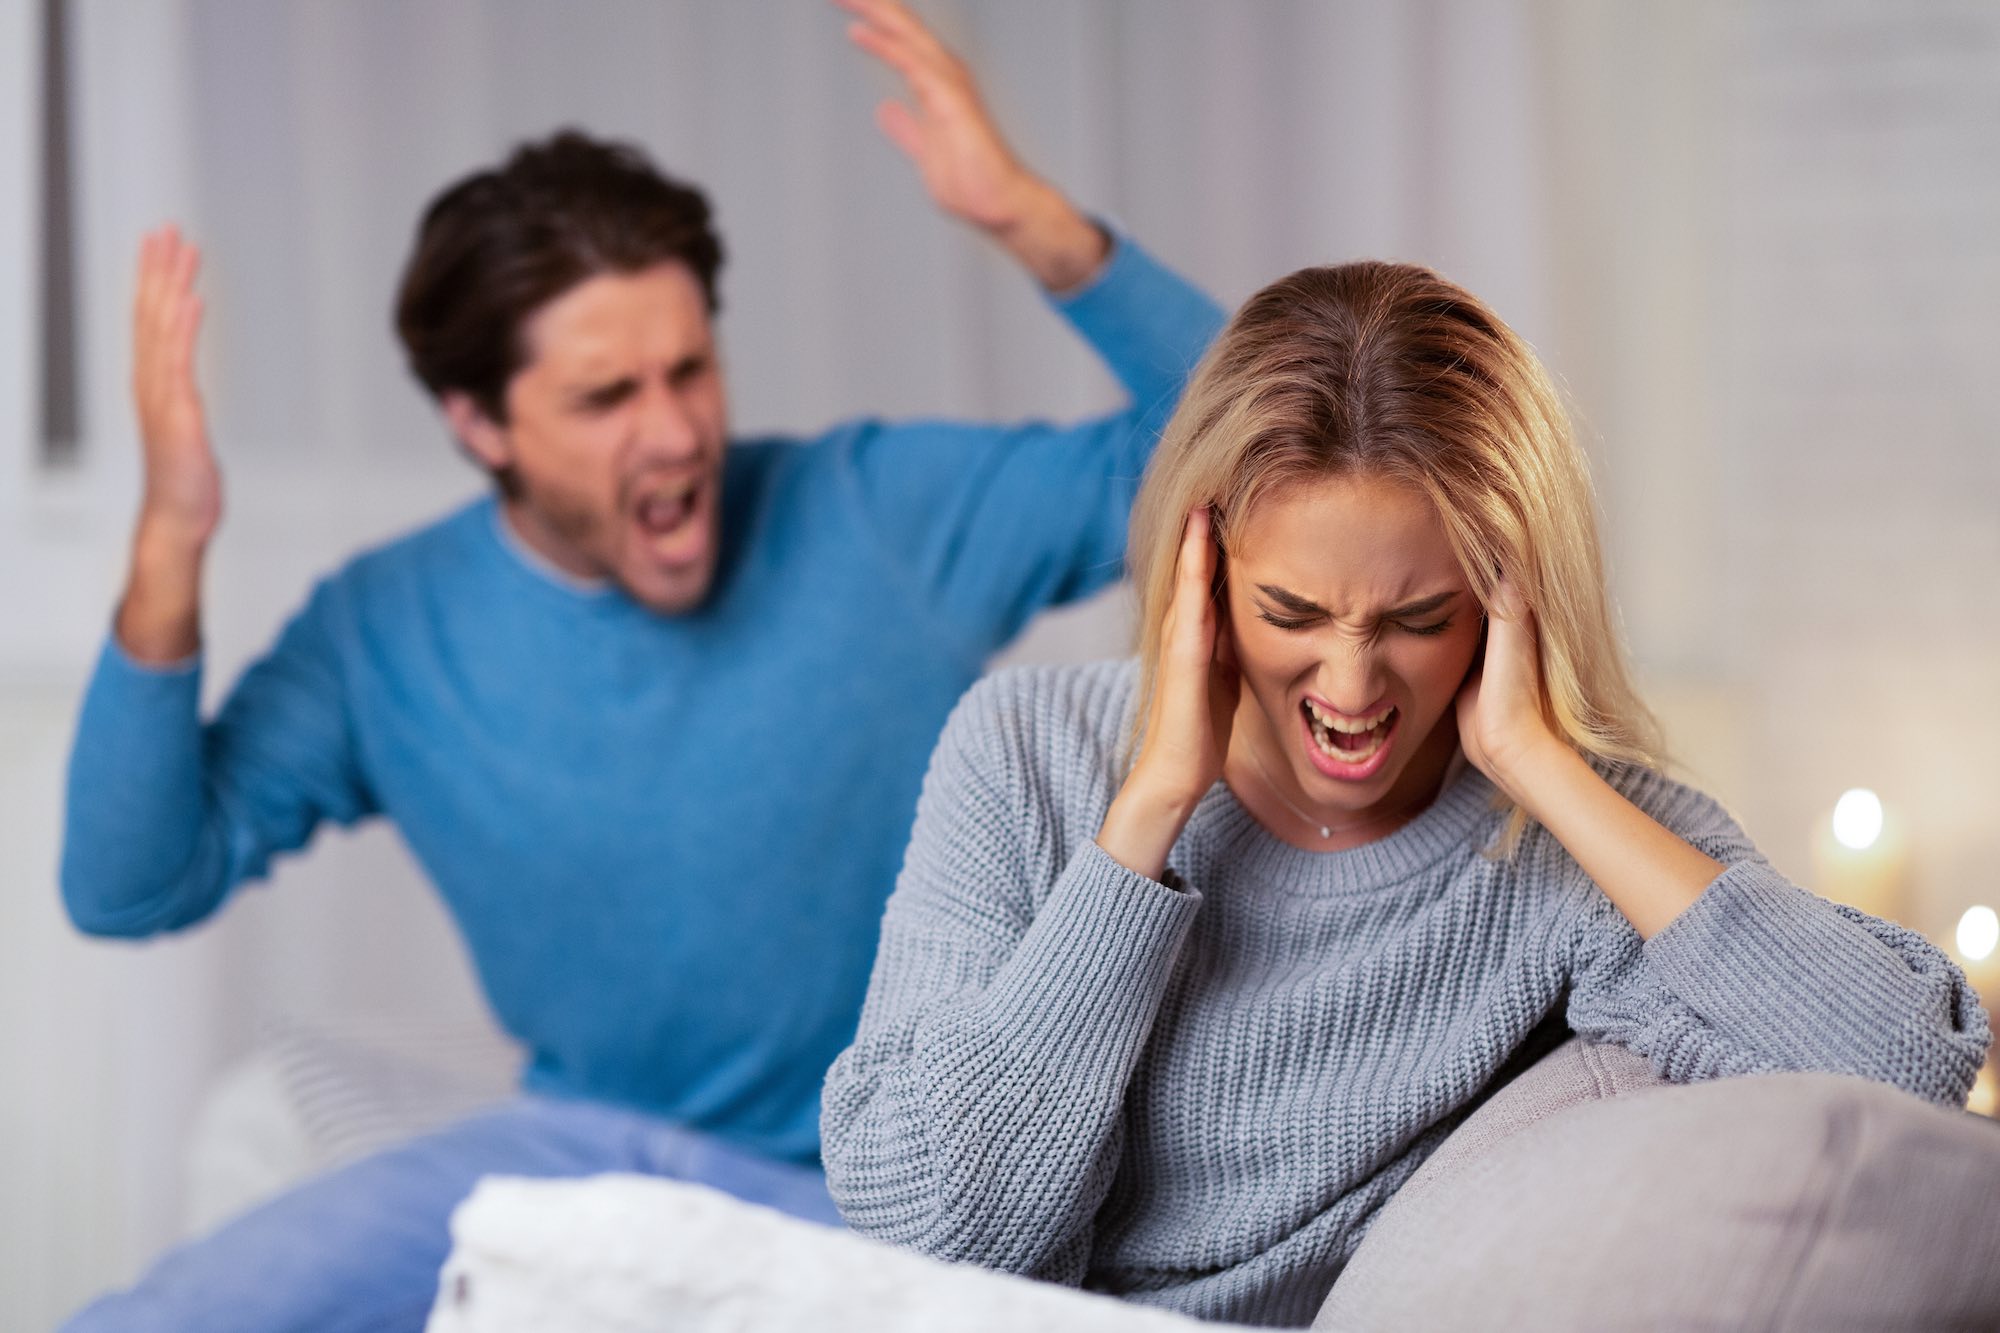 Can I Sue My Ex for Their Actions During Our Marriage?